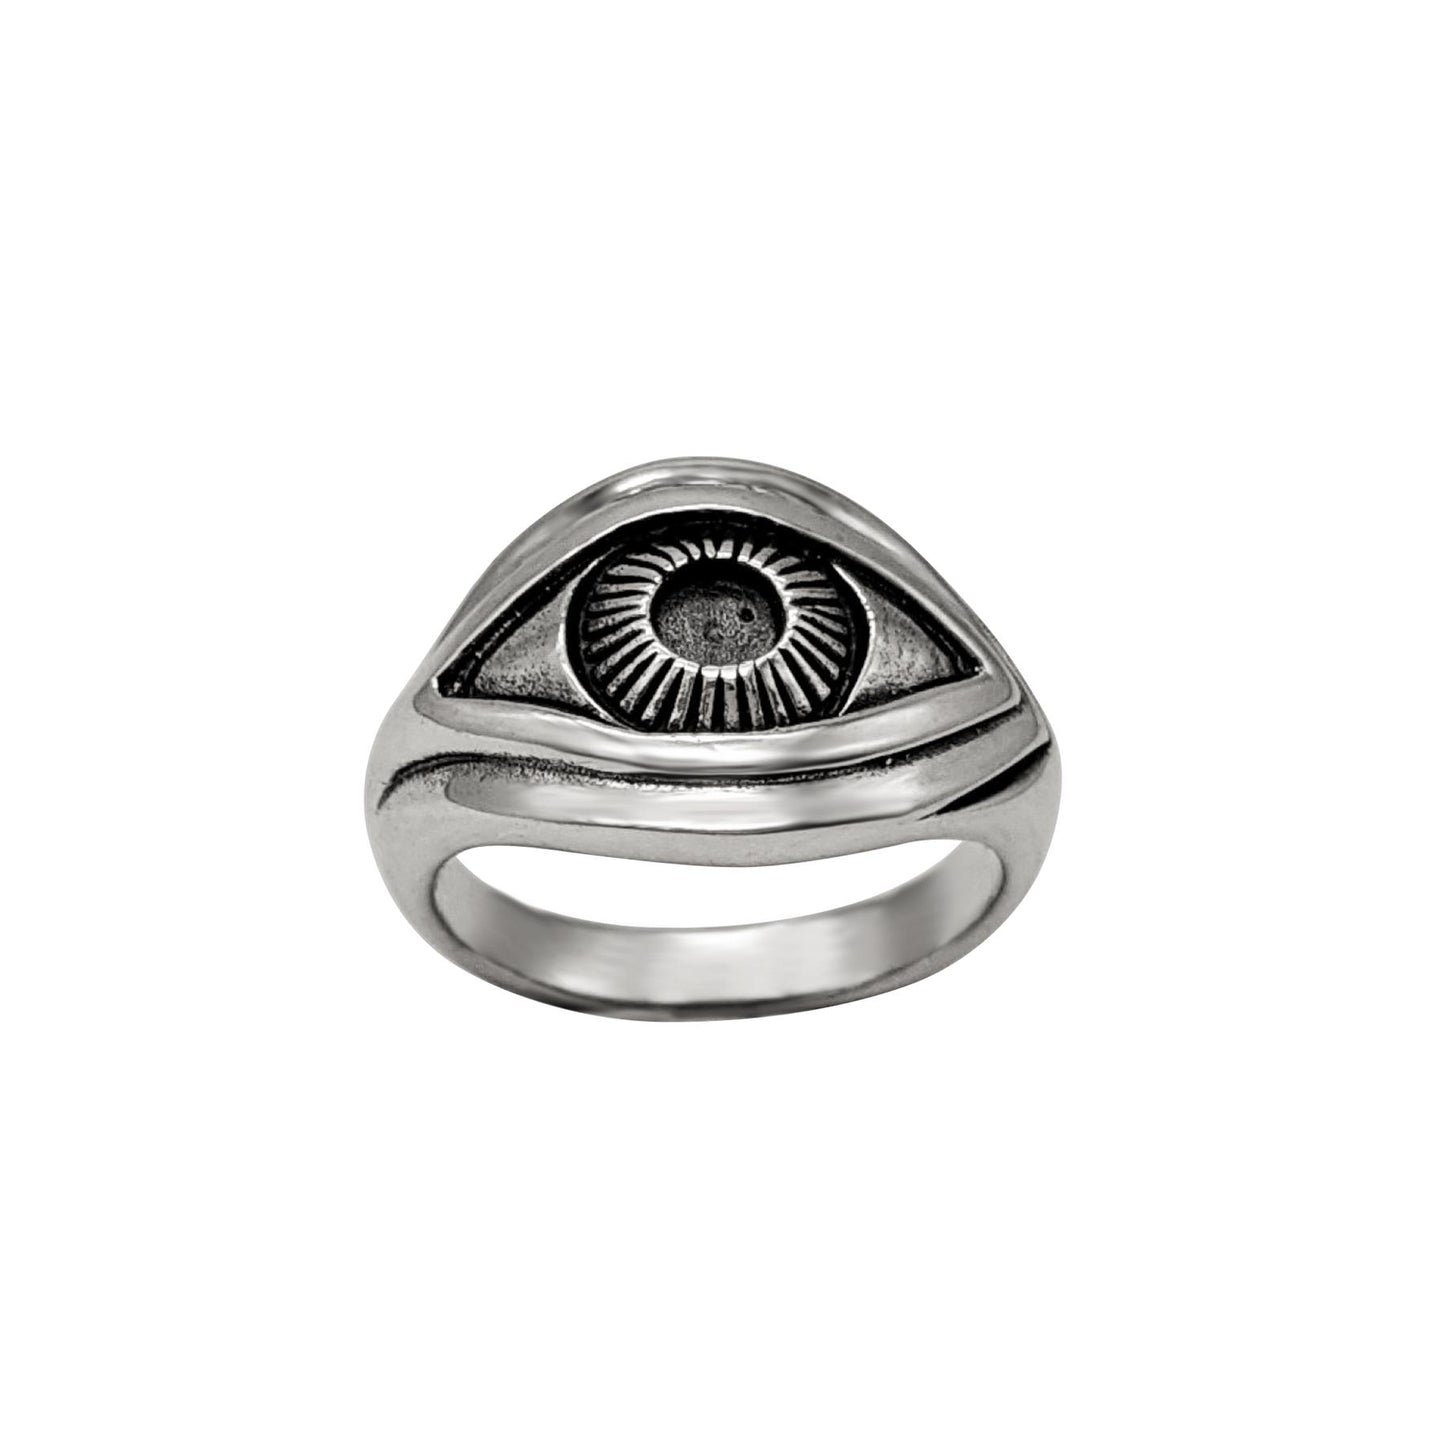 Sterling Silver Oxidised Eyeball Eye Ring Unique Gothic Wiccan Design